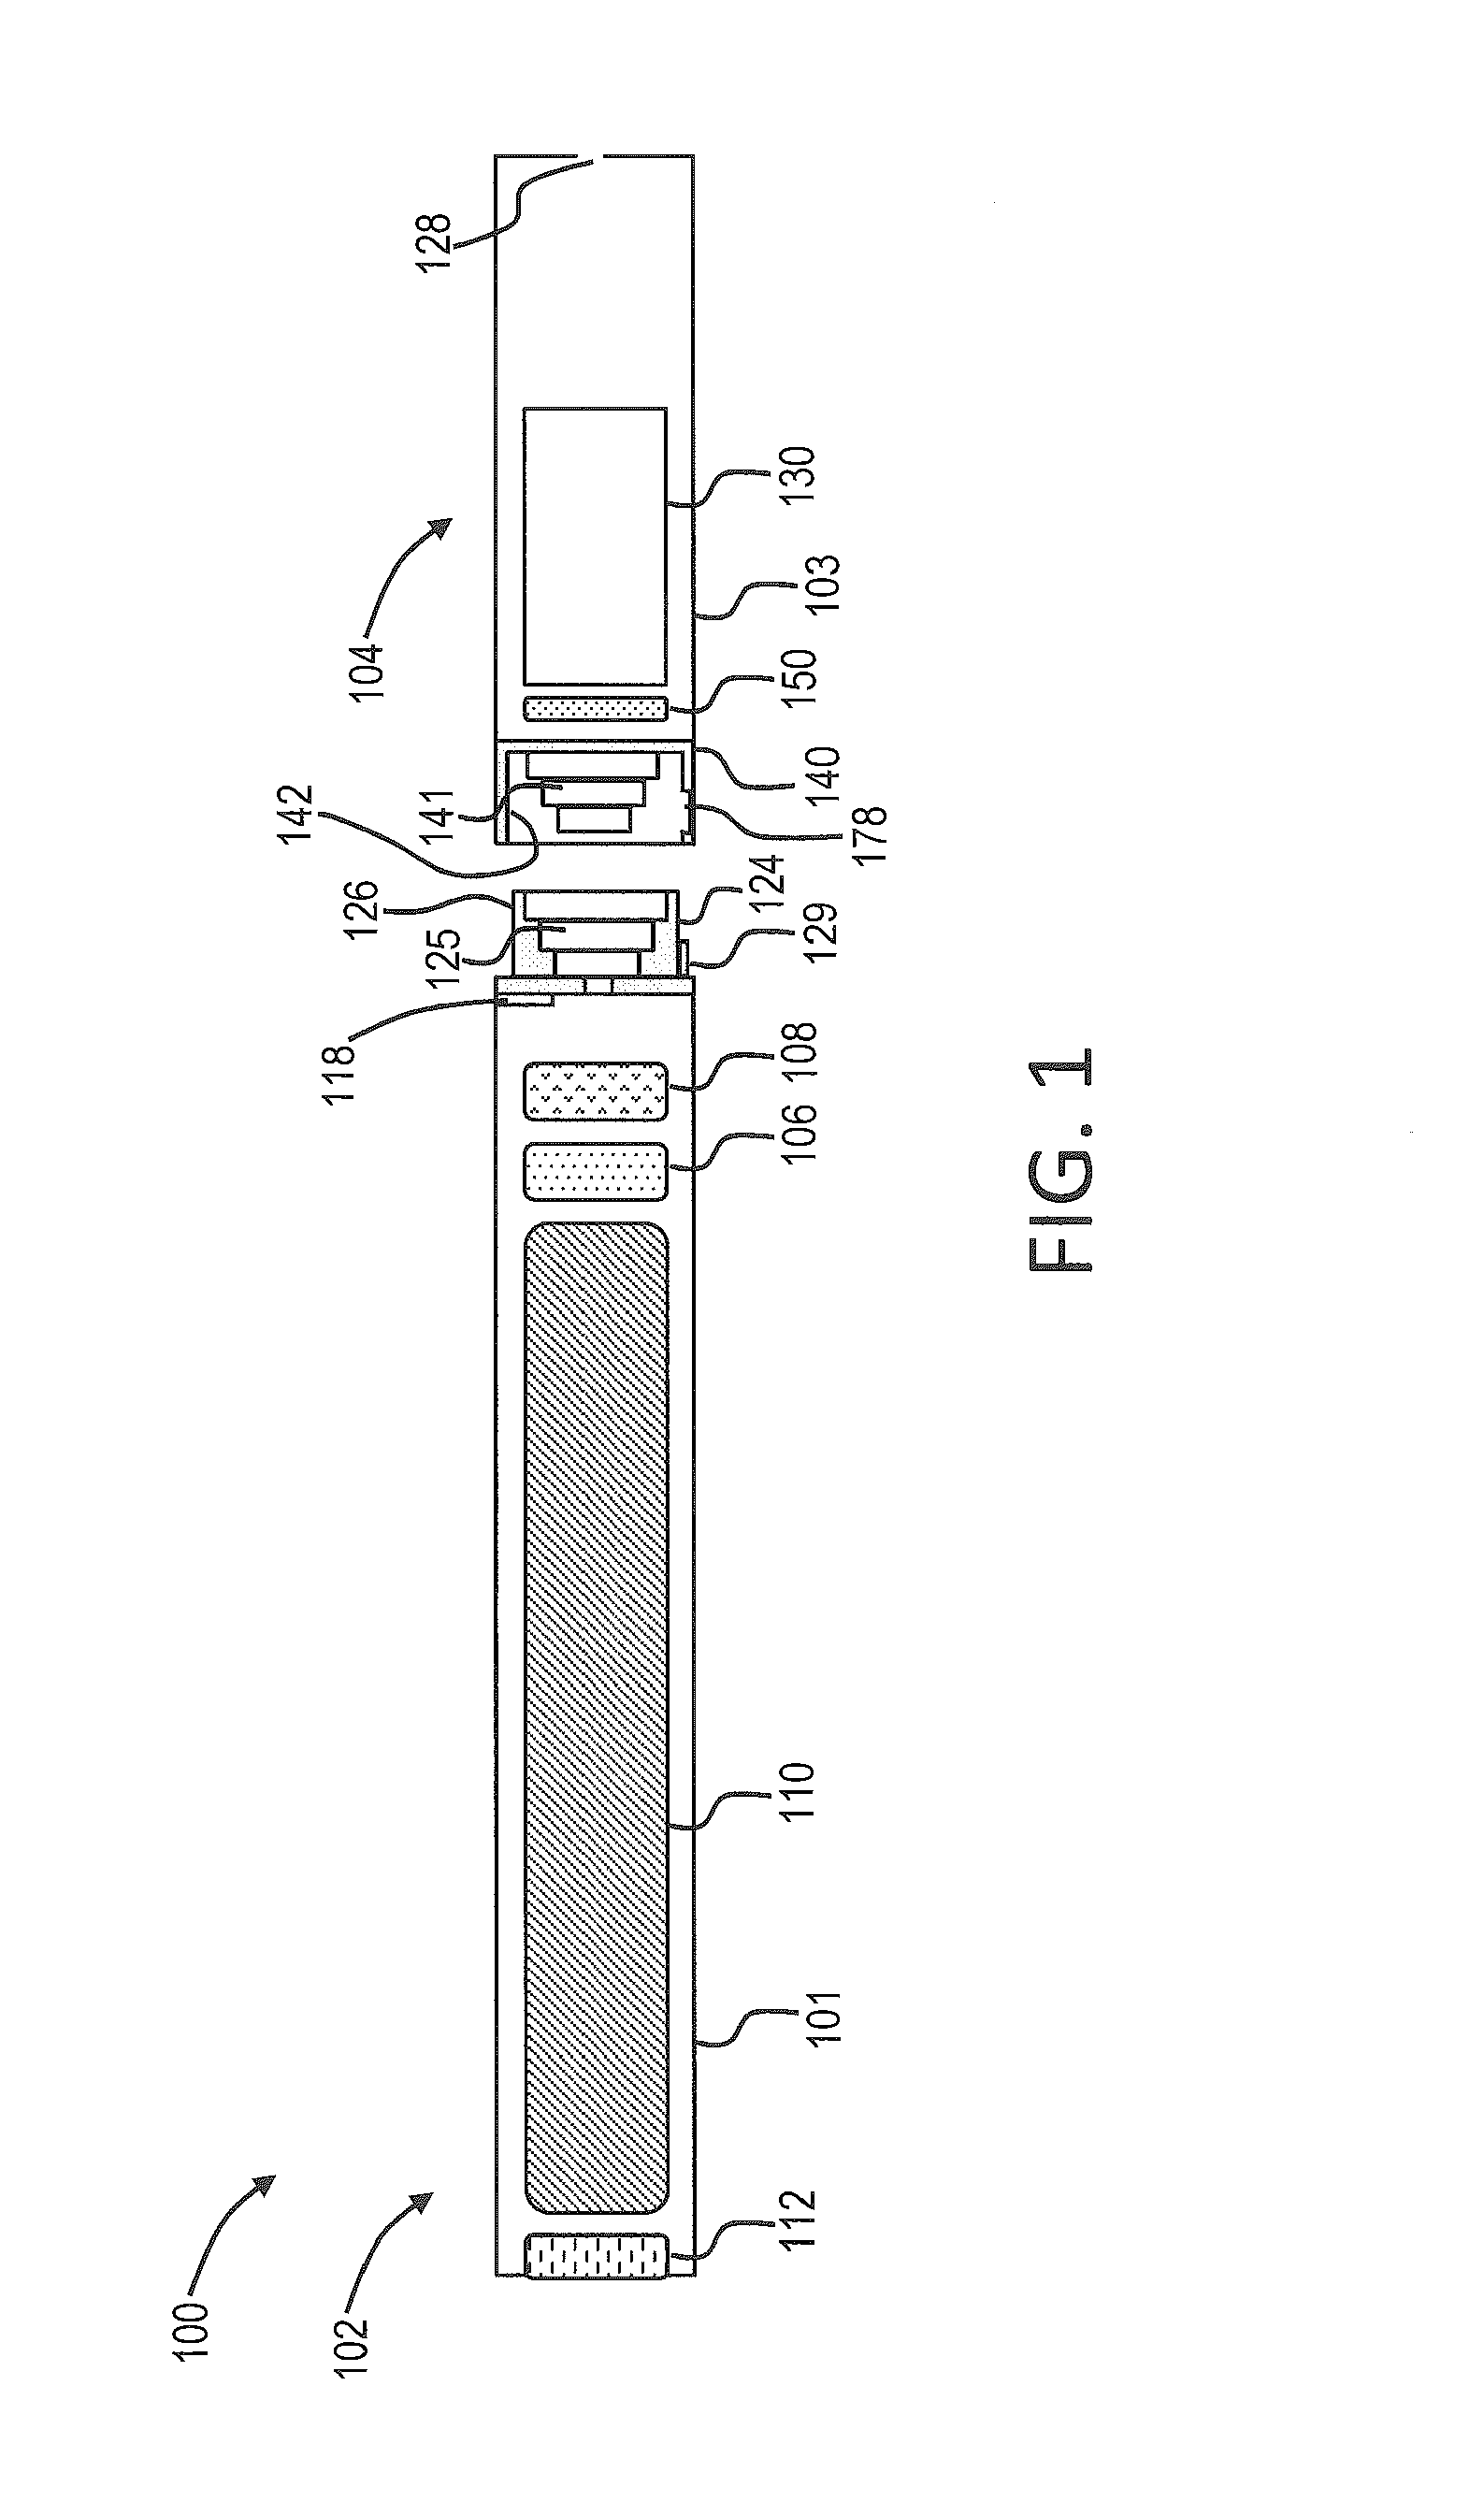 Aerosol delivery device with microfluidic delivery component